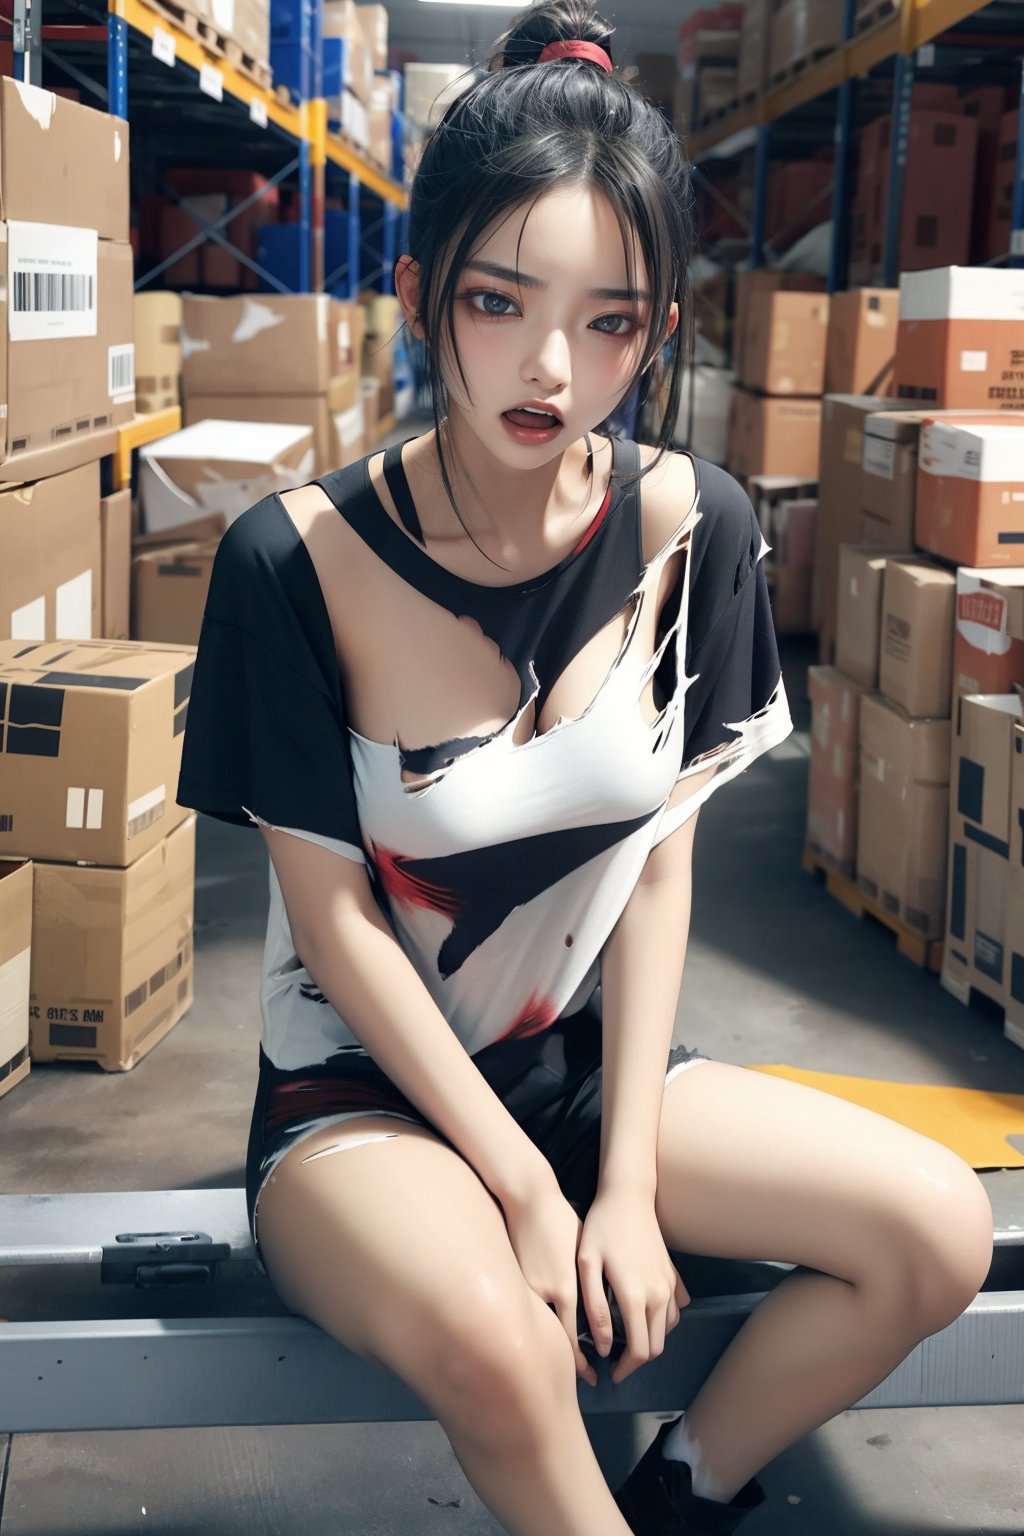 A very beautiful Korean girl, 18 years old, wearing torn and torn clothes, disheveled, slightly messy hair, frowning, open mouth, scared expression, sitting in a warehouse,tear clothes